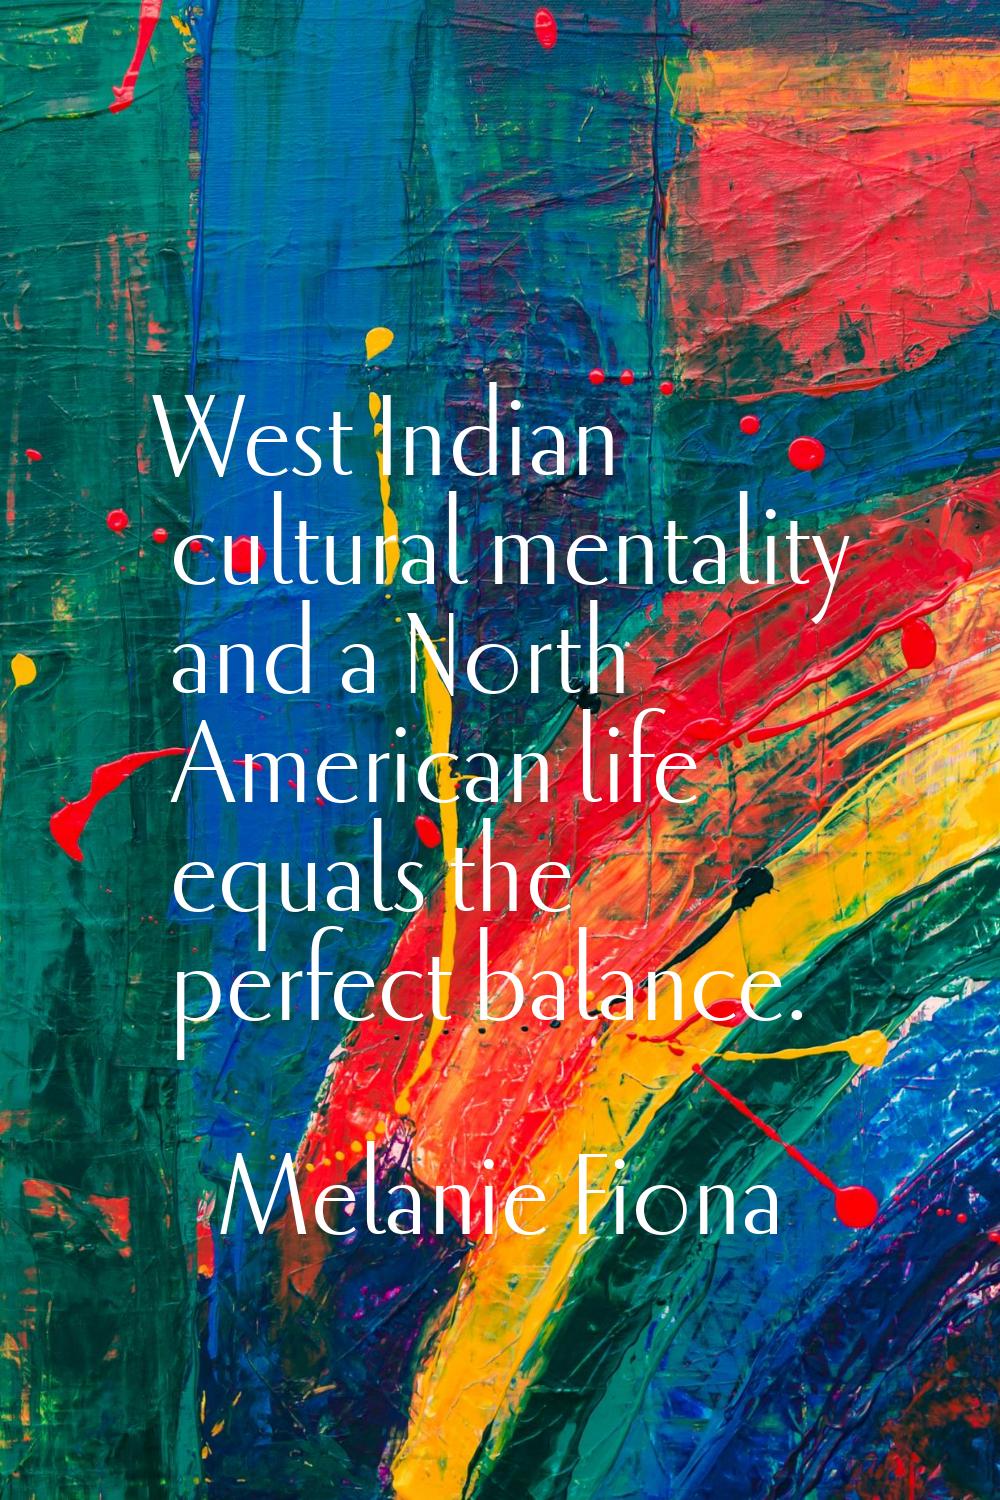 West Indian cultural mentality and a North American life equals the perfect balance.